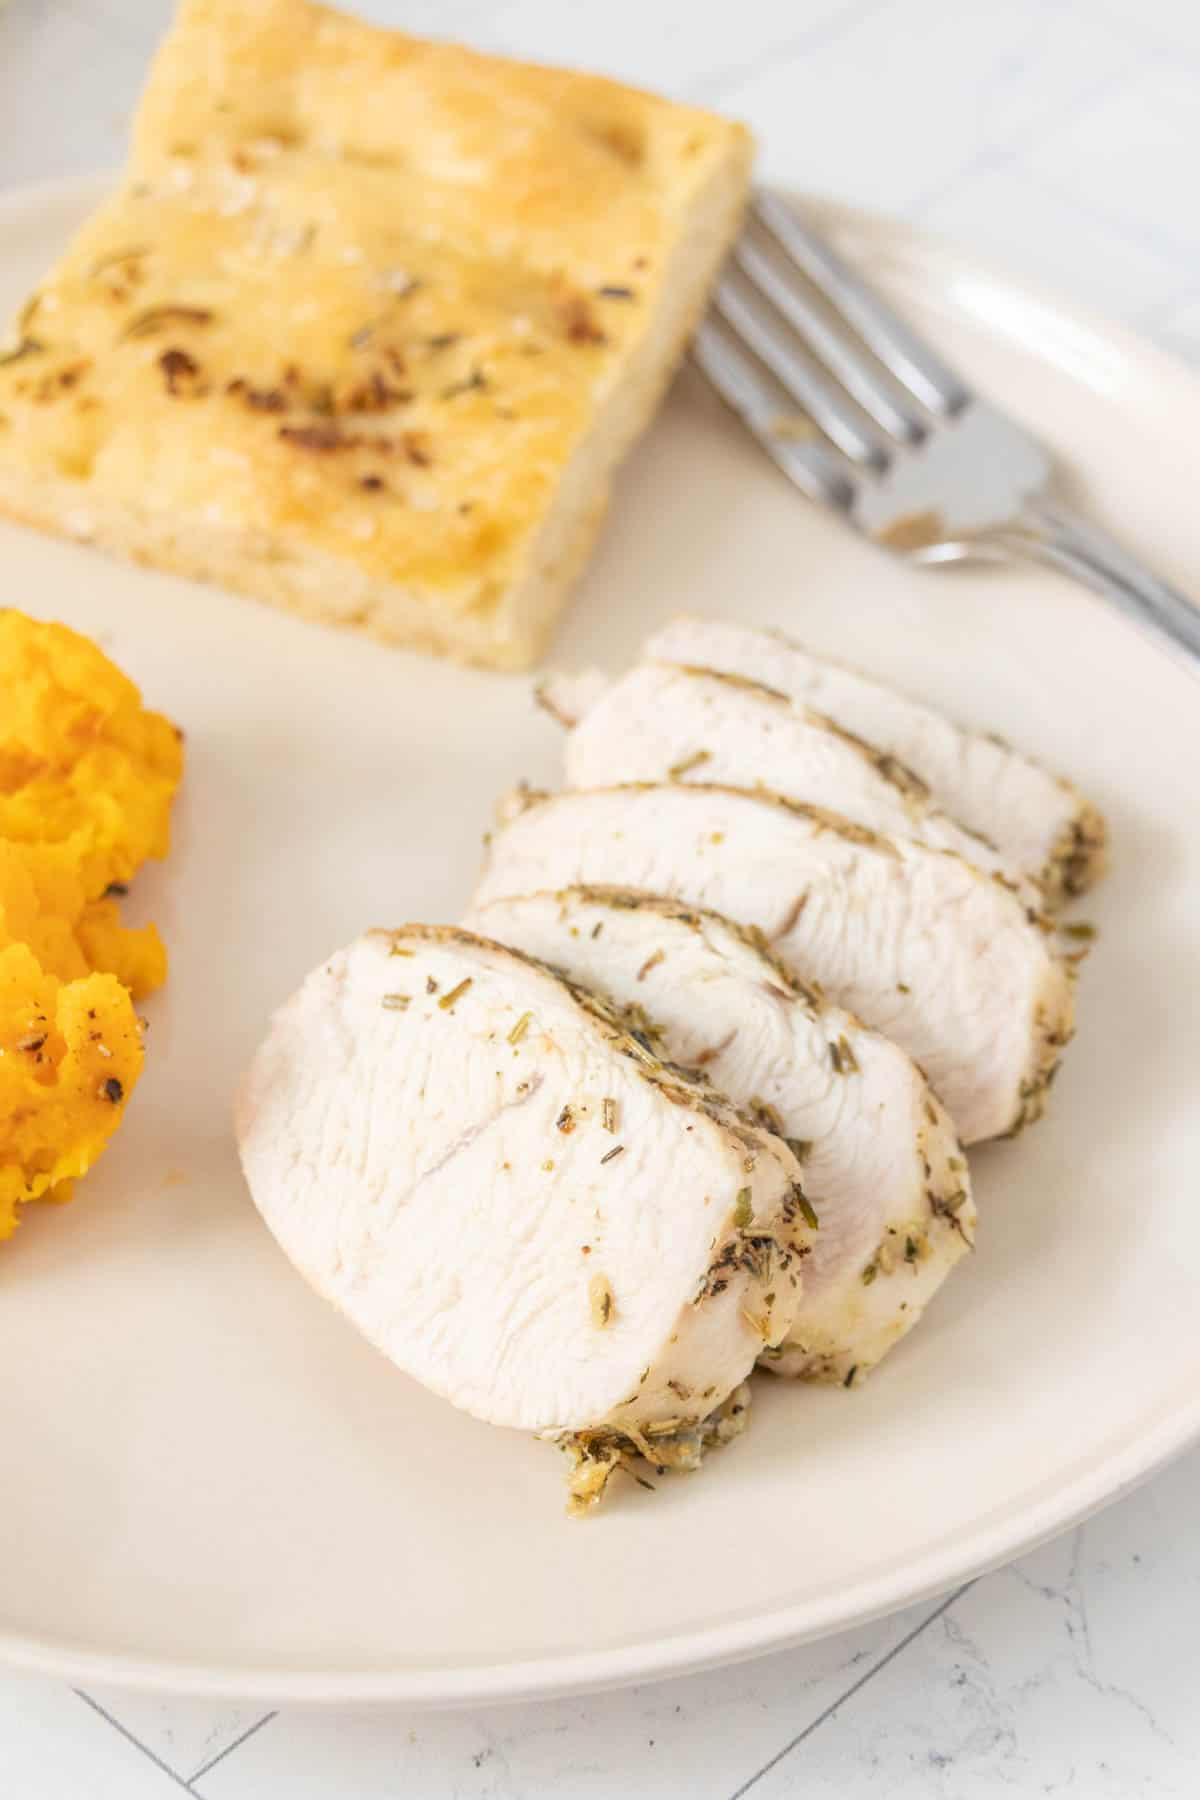 A plate with a slices of turkey and mashed potatoes.